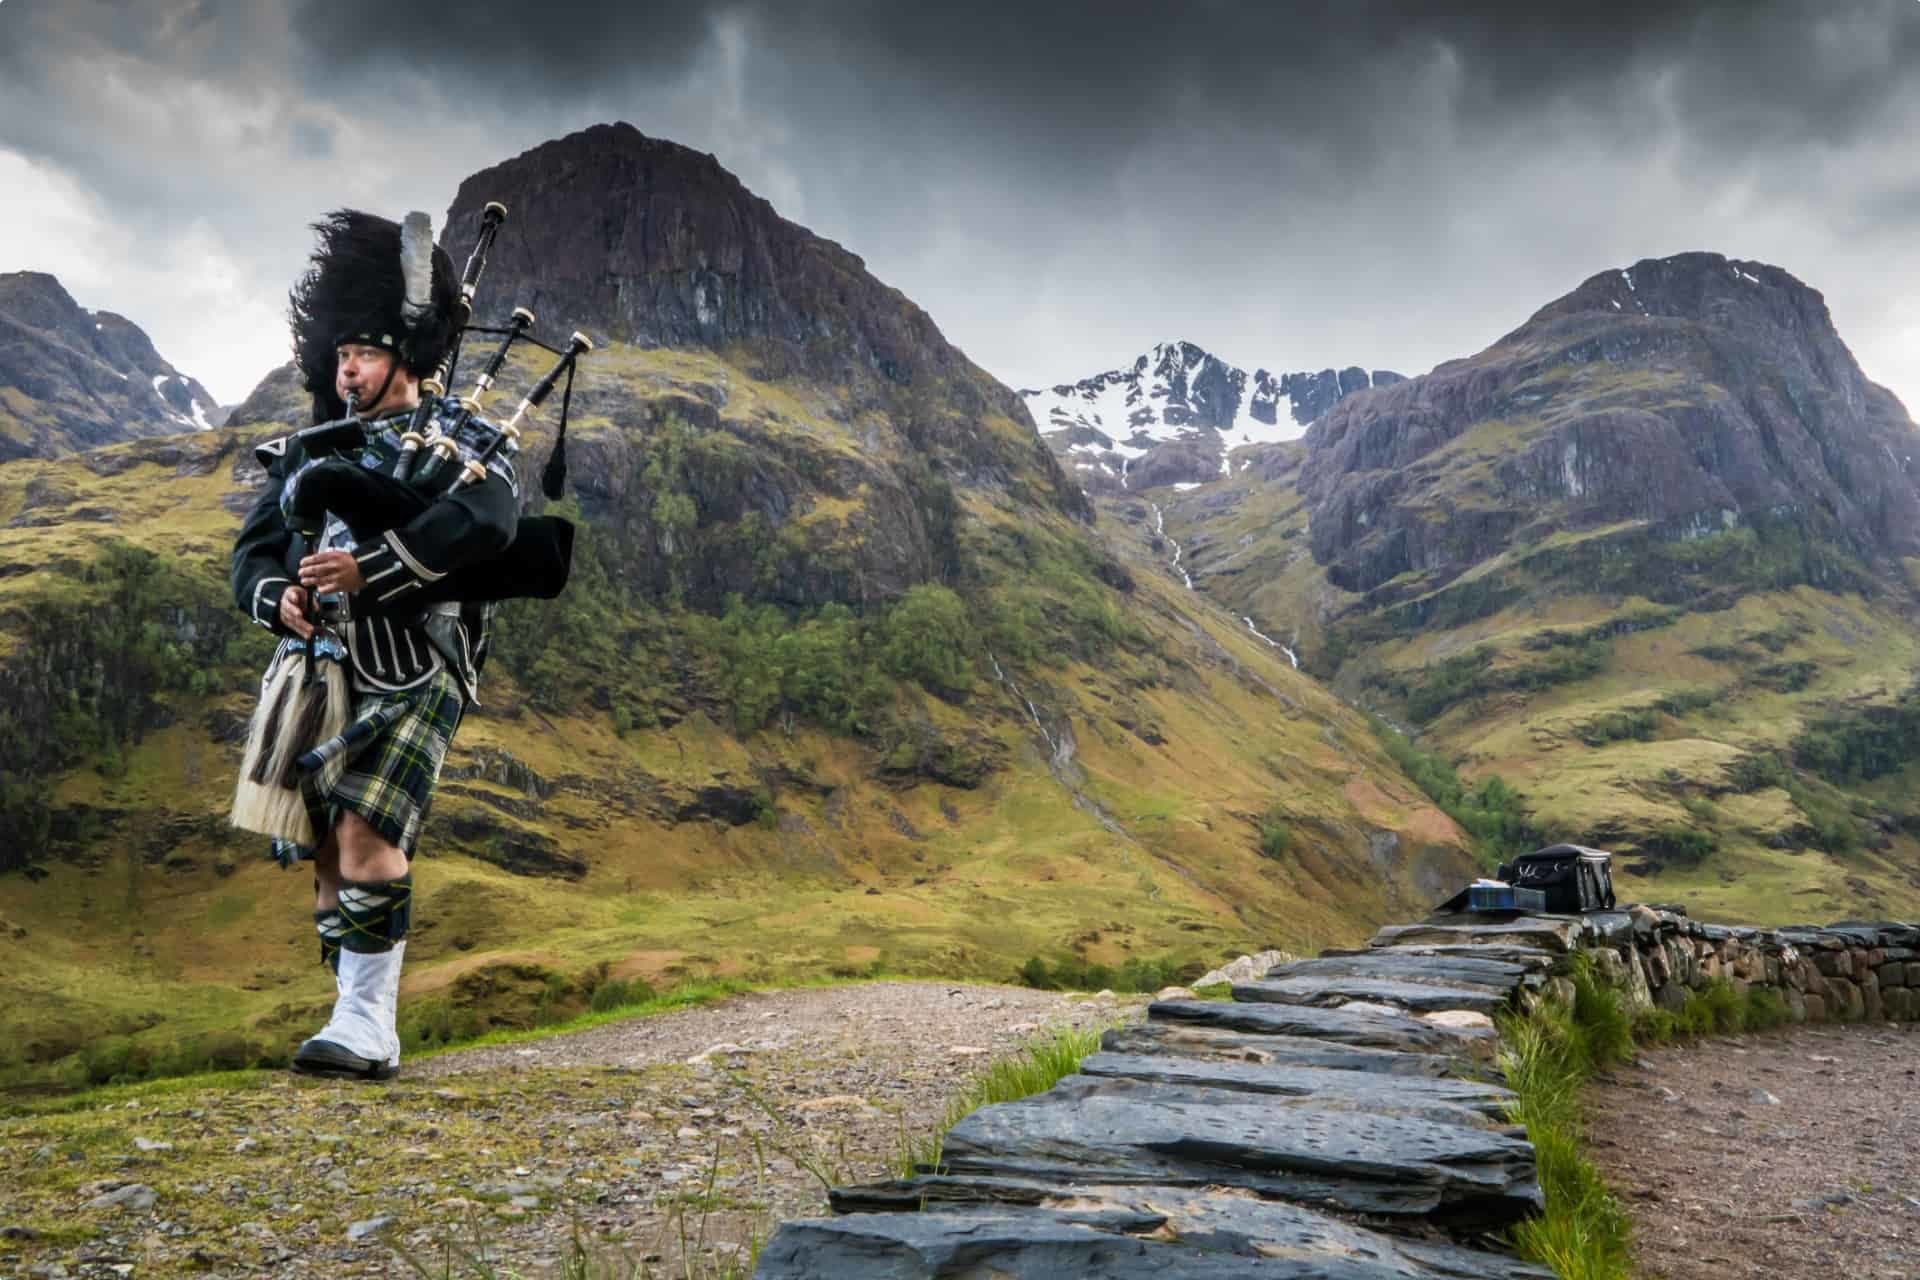 Bagpipe player in the Highlands, Scotland